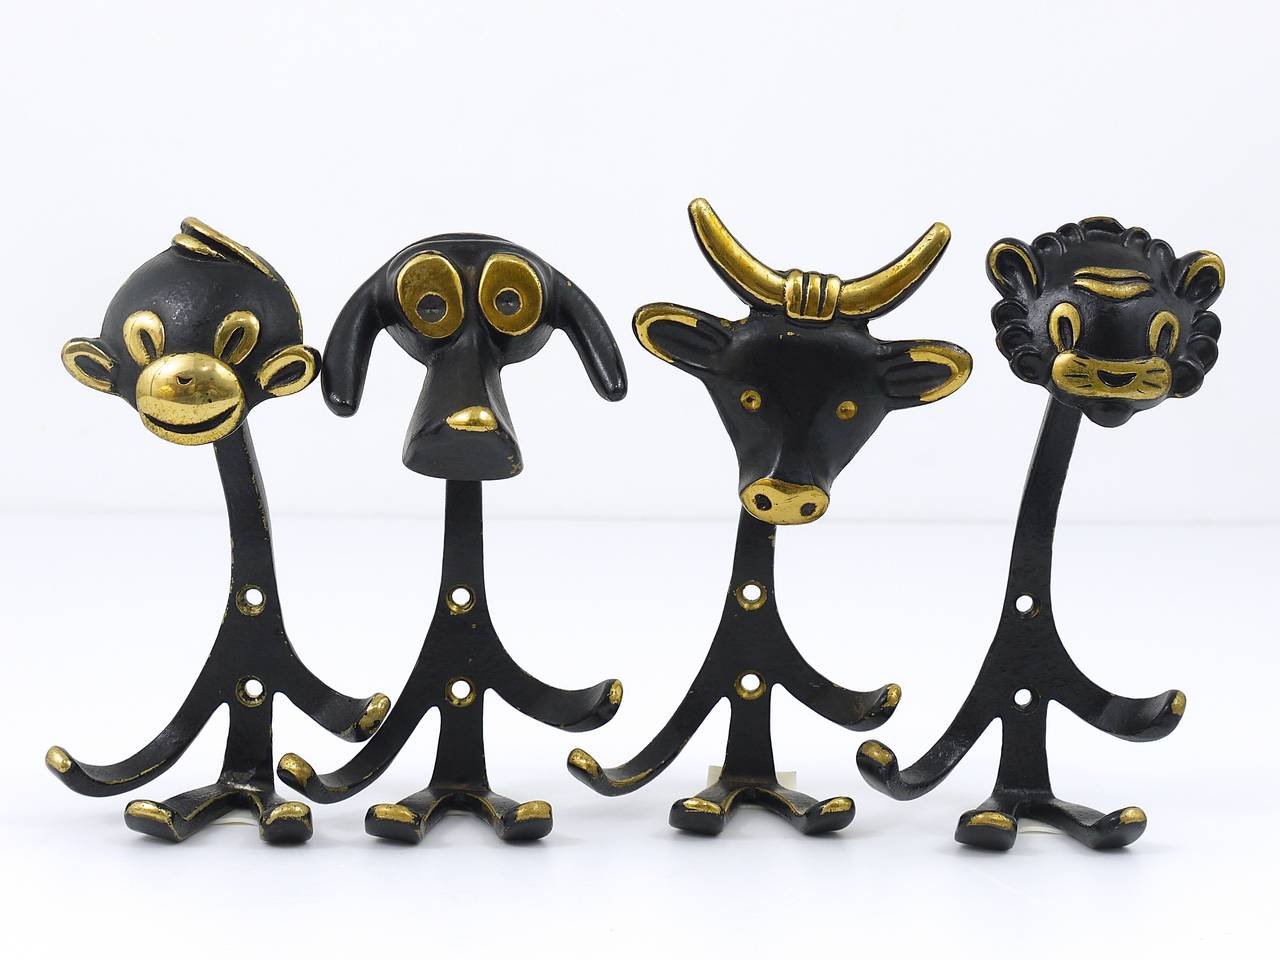 A set of 4 Viennese modernist brass wall coat hooks, displaying a dog, a cow, a lion and a monkey. Designed in the 1950s by Walter Bosse, executed by Baller Vienna. Made of black finished brass. In very good condition with nice patina. Each hook has